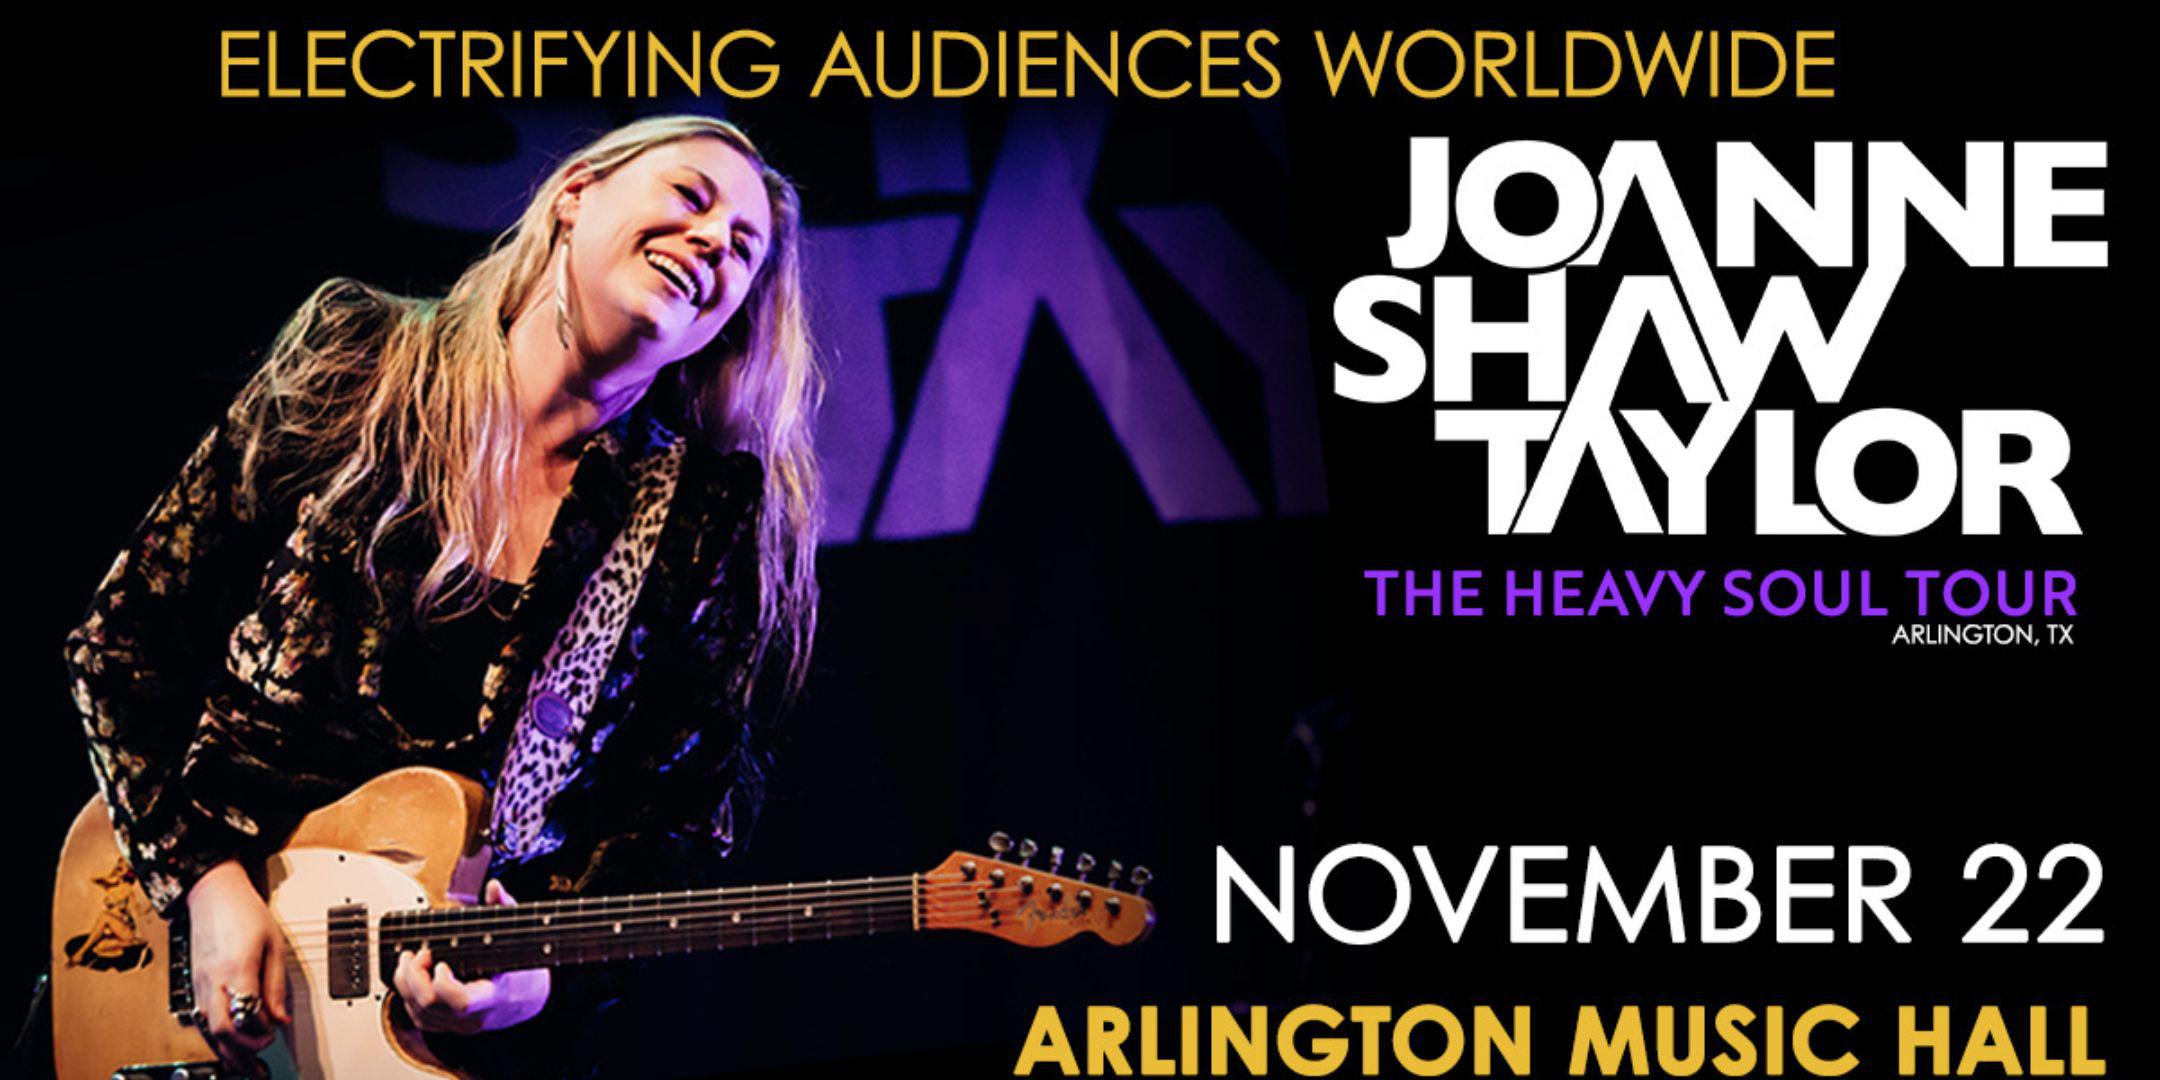 An Evening With Joanne Shaw Taylor 'The Heavy Soul’ Tour